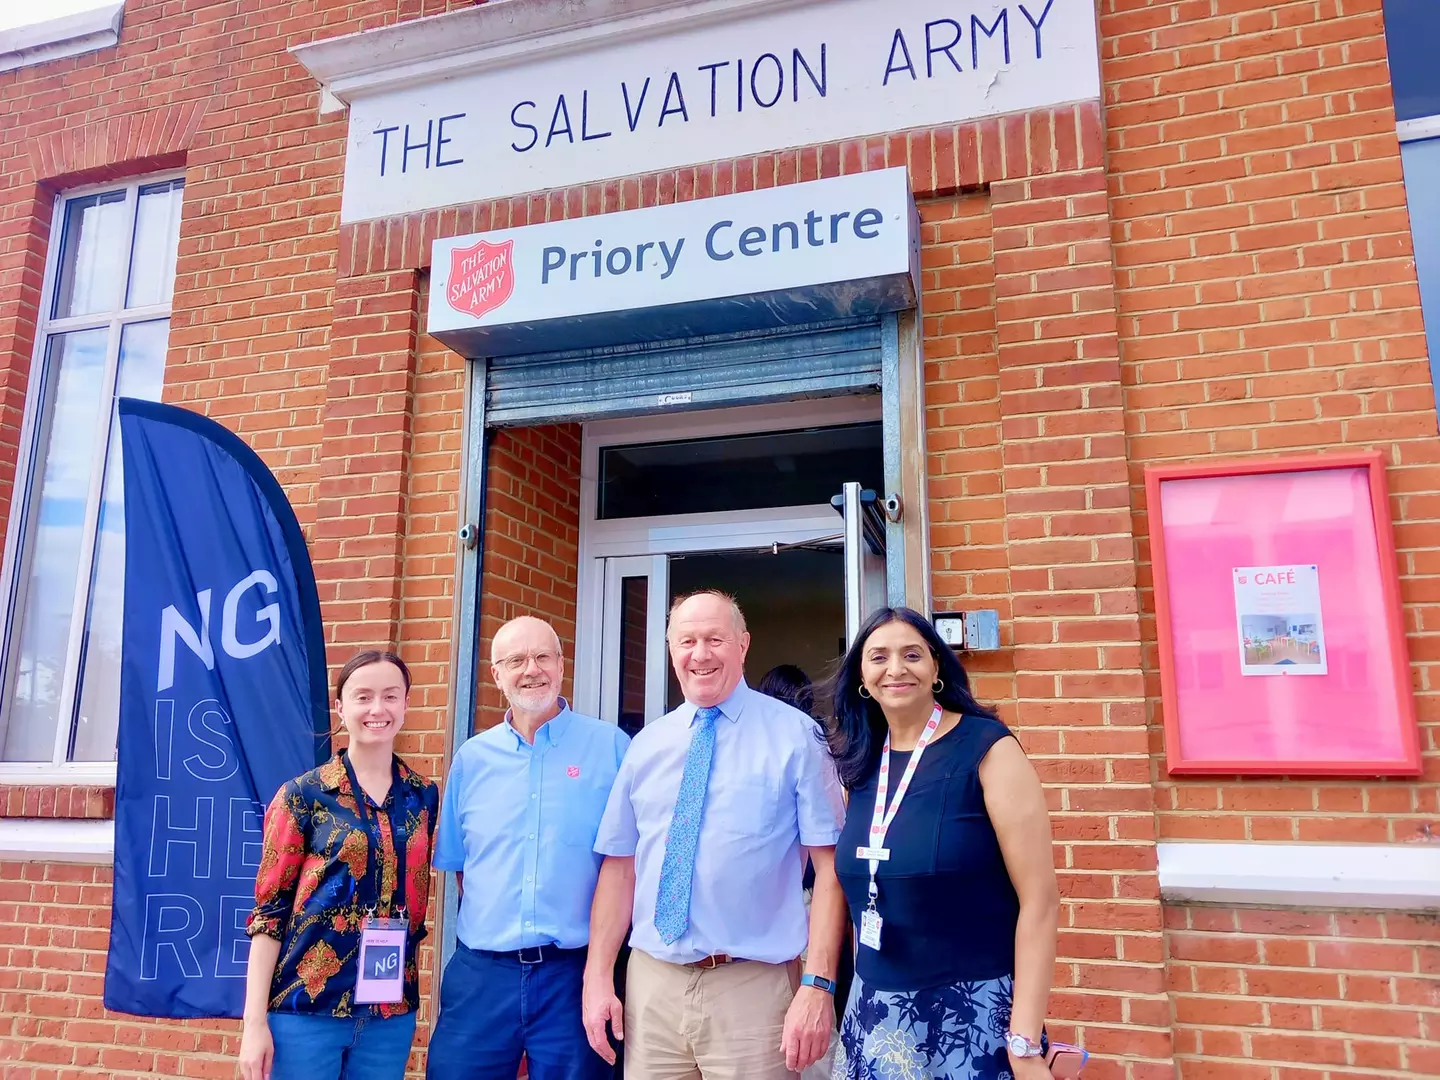 Visit from the Suffolk Police and Crime Commissioner, Tim Passmore. (Left to Right: (Beth Ambrose, Community Youth Worker, NG Youth Project-CYM,  Major Andrew Jarrold, Commanding Officer Ipswich, Tim Passmore, Suffolk Police and Crime Commissioner, Shamaila Waddle, Community Manager)